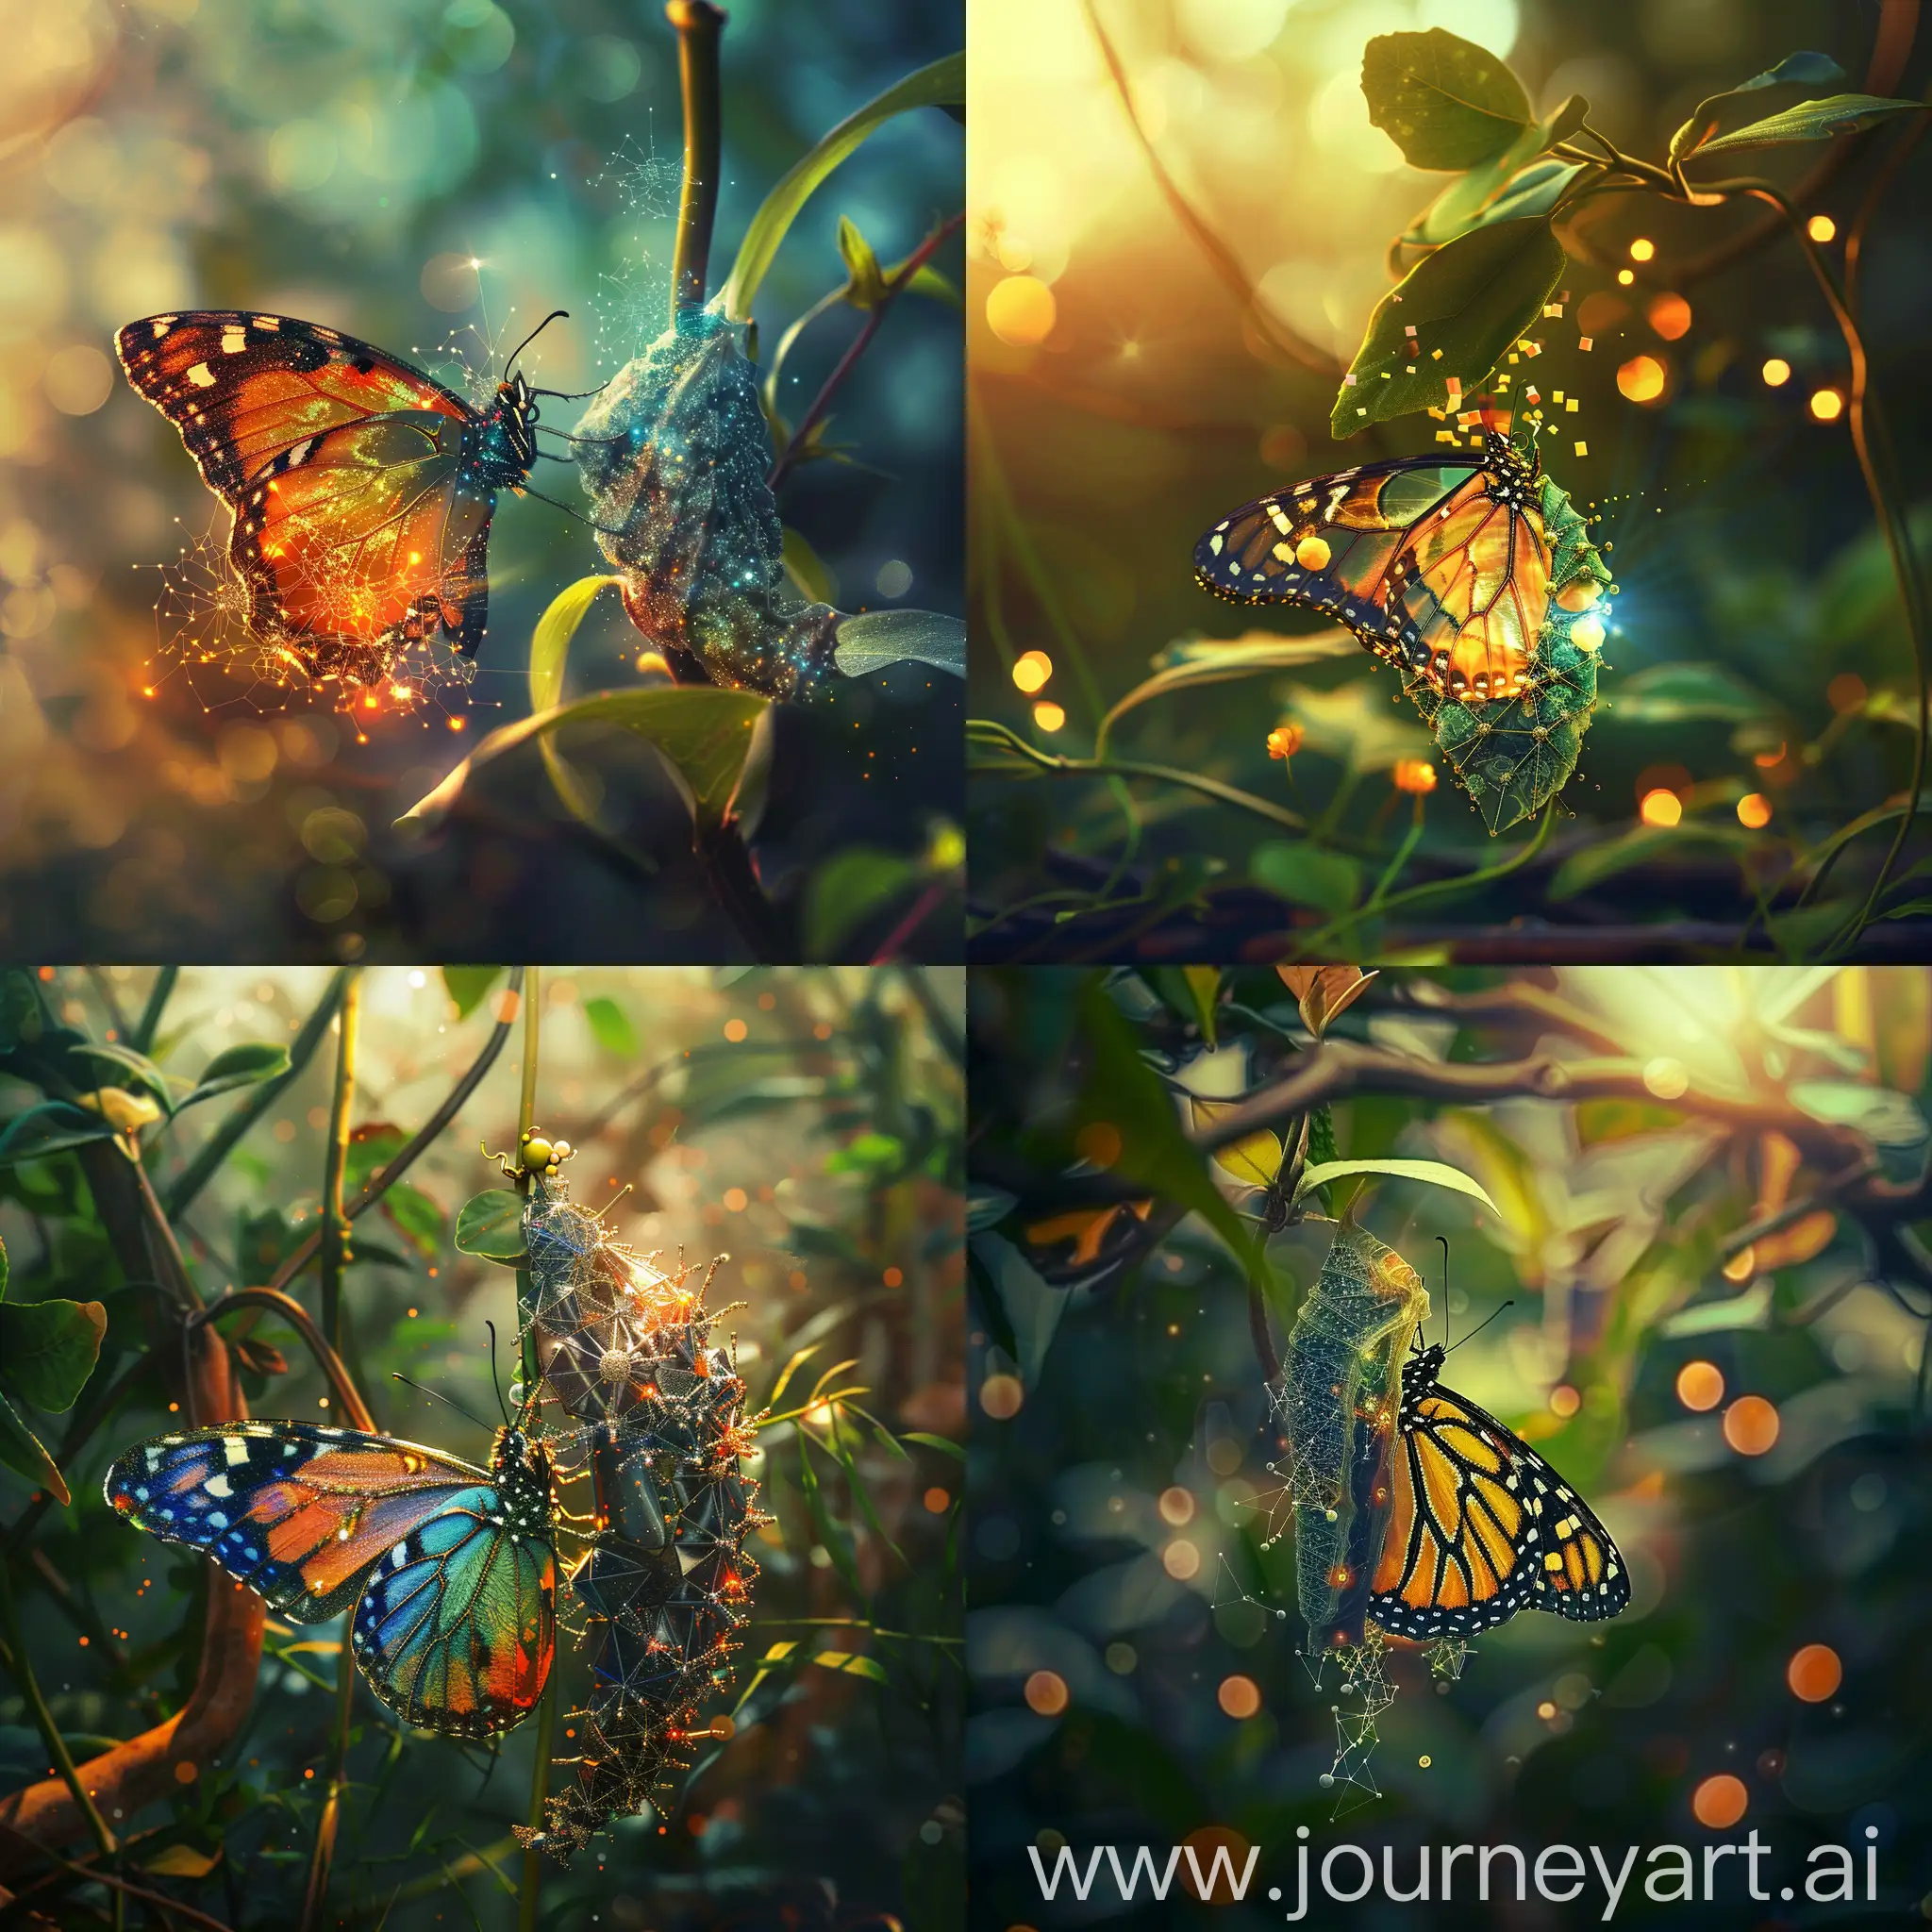 A butterfly emerging from its chrysalis symbolizing imminent change, highlighting the transformative and evolving aspects of nature.
The butterfly has a bright color theme, in contrast to the  nature background, and is made of quantum qubits and quantum entanglements. 